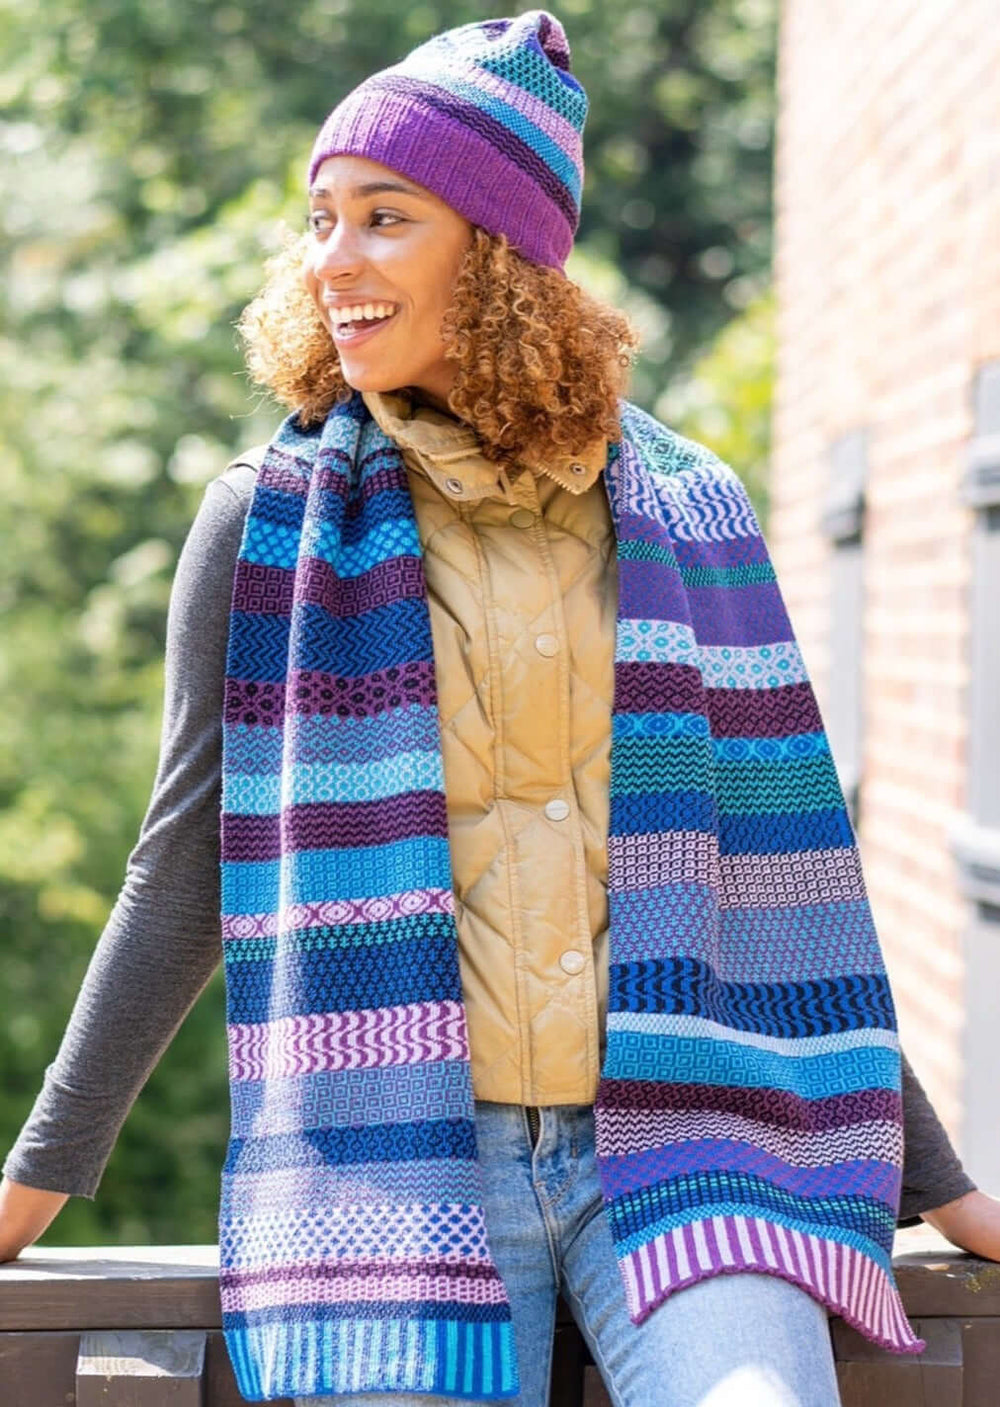 Solmate RASPBERRY  Knitted Scarf with Colors turquoise, purple, black, lilac, royal blue. | Made in USA | Classy Cozy Cool Women's Made in America Clothing Boutique